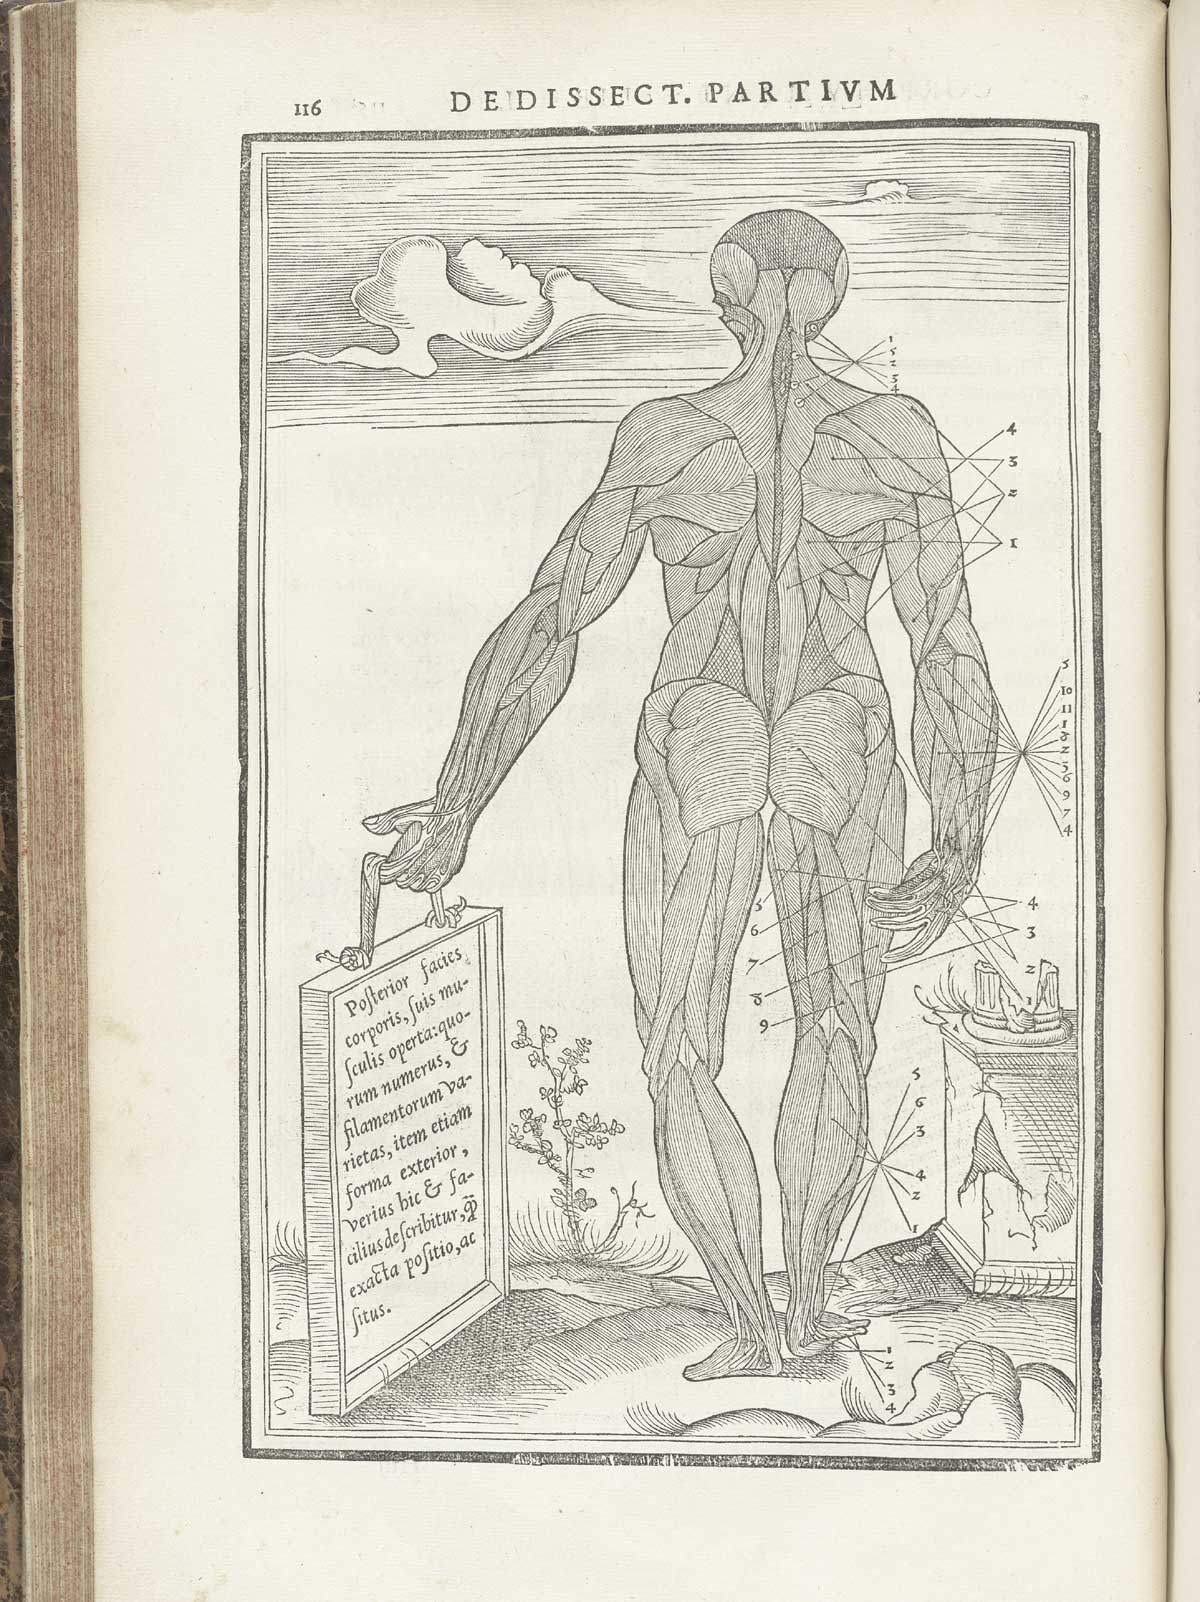 Woodcut muscle figure standing in a pastoral setting, with his back to the viewer with his left hand holding a placard with text in Latin describing the exterior layer of muscles which are exposed, with index letters surrounding him pointing to numerous structures, from Charles Estienne’s De dissection partium corporis humani libri tres, NLM Call no.: WZ 240 E81dd 1545.